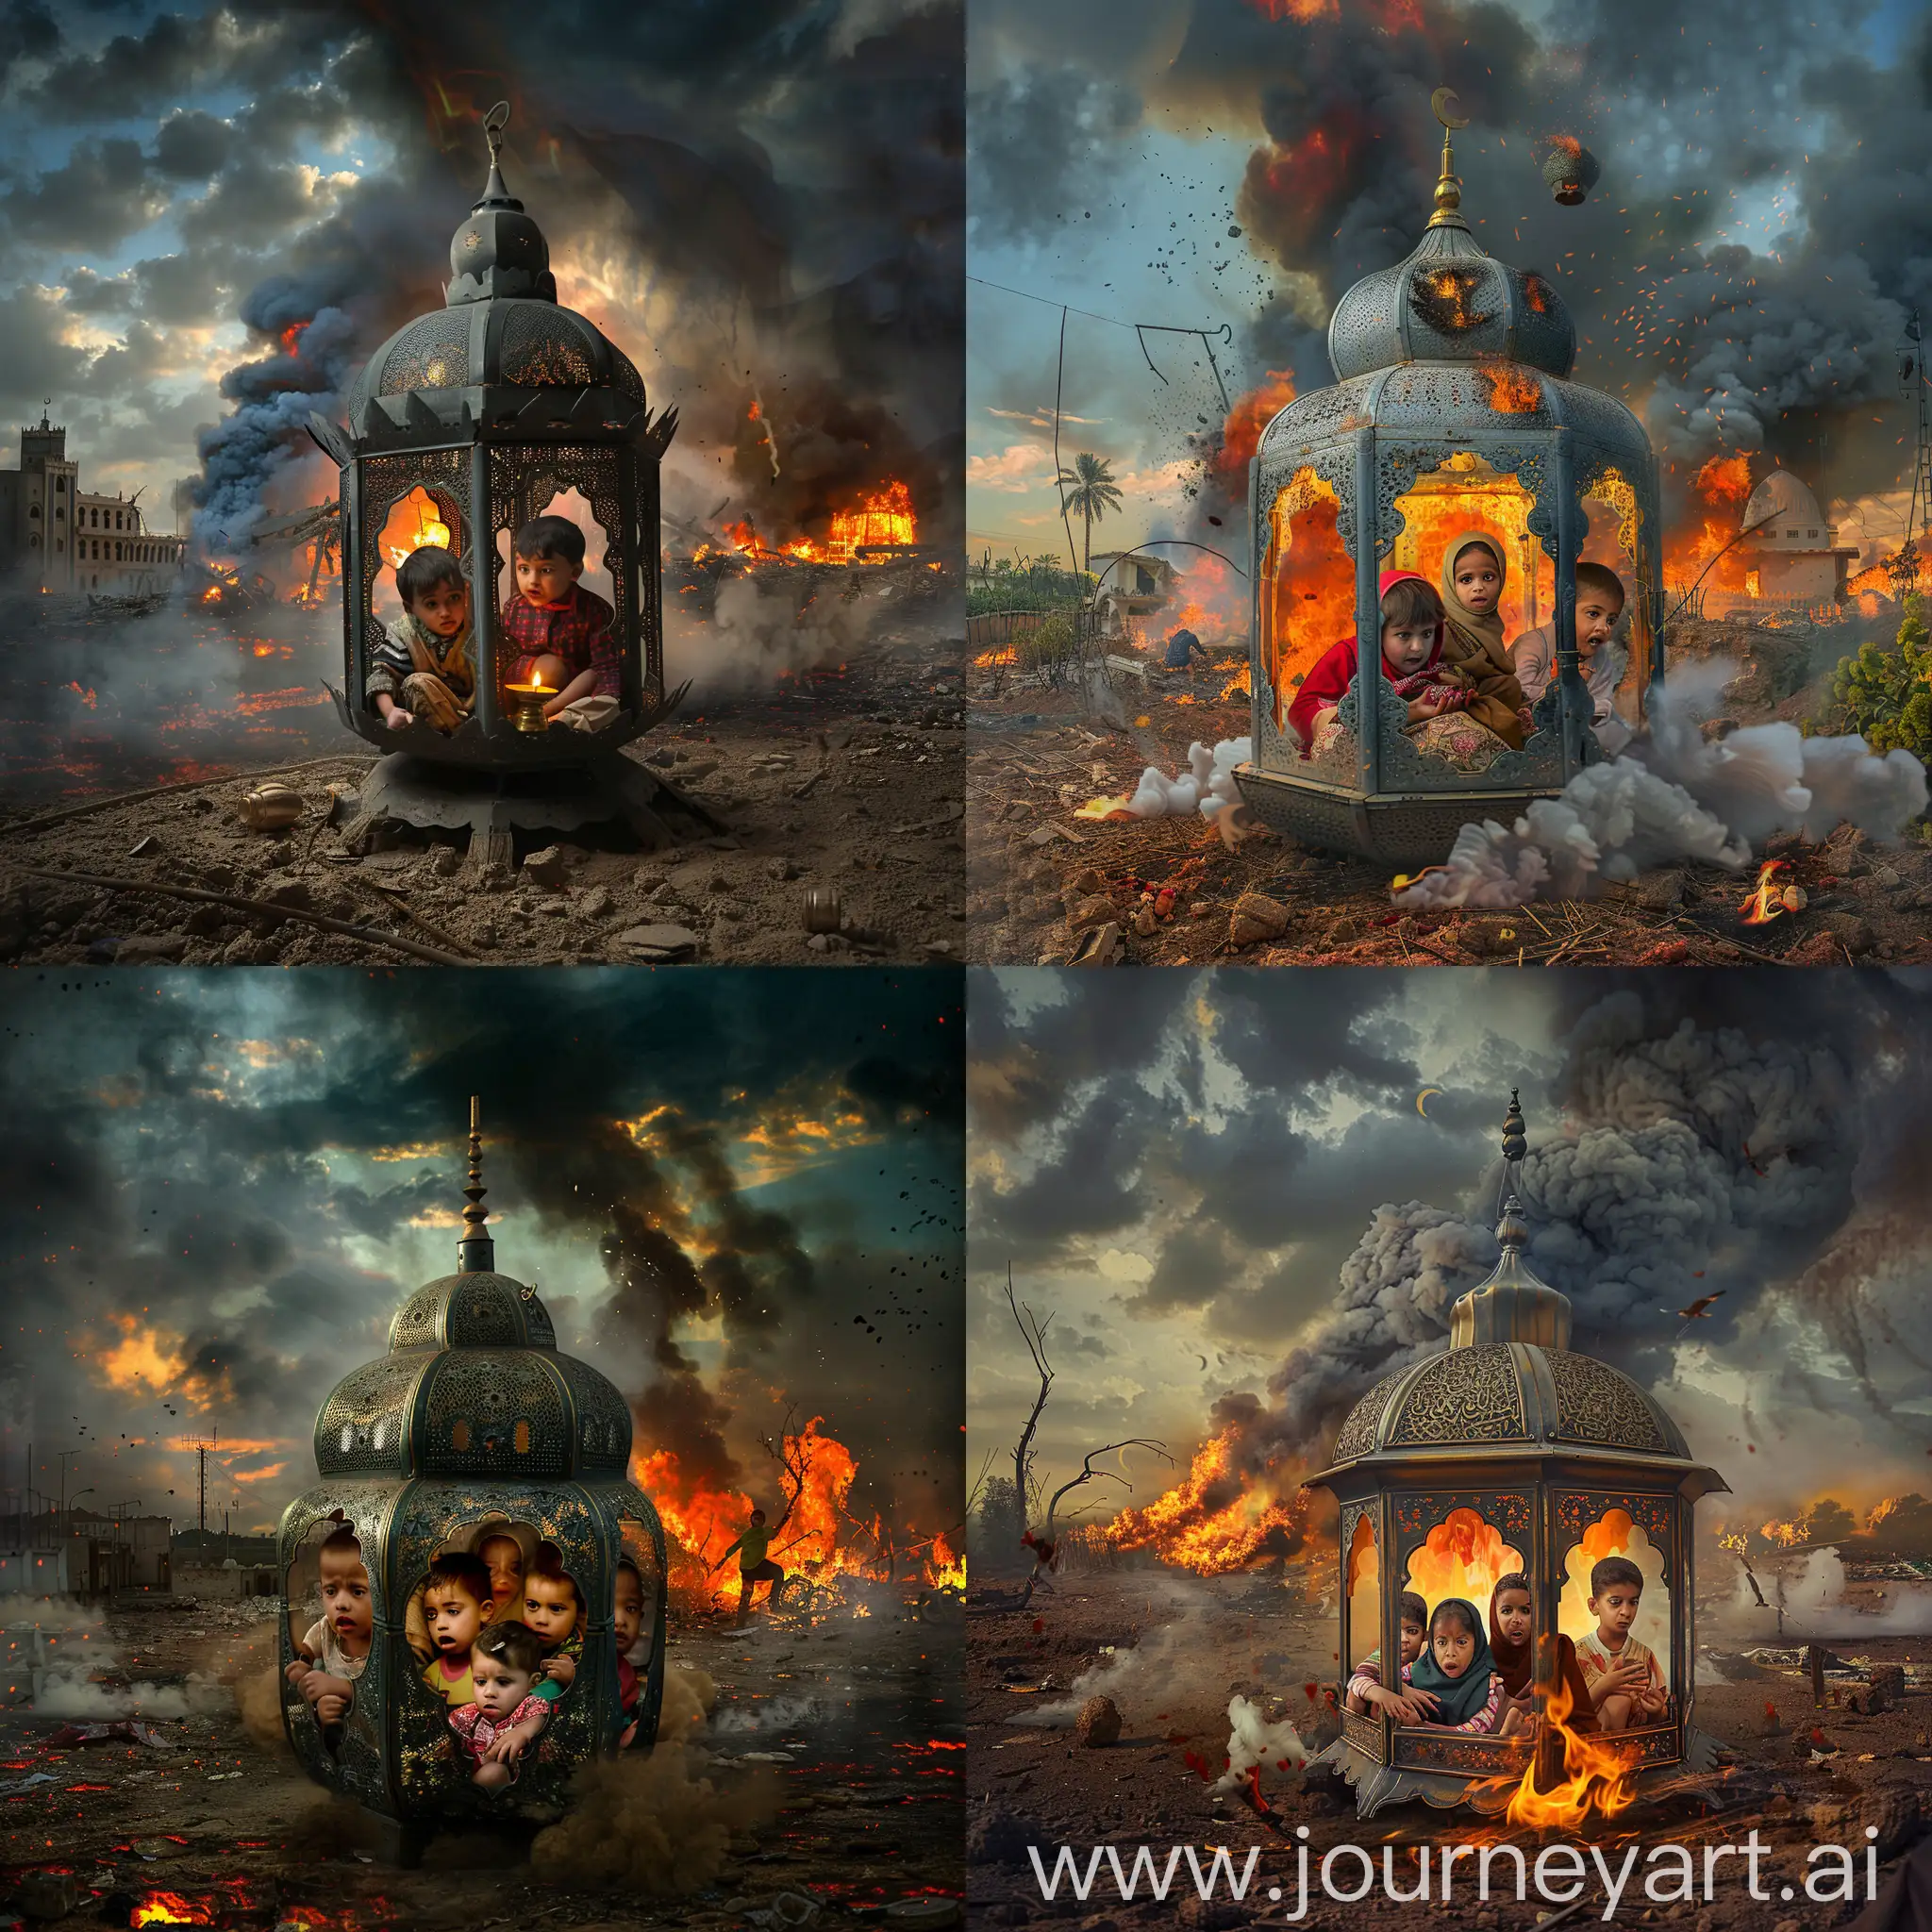 Frightened children sitting inside a large Ramadan lantern placed on the ground, with fire, destruction and smoke in the background